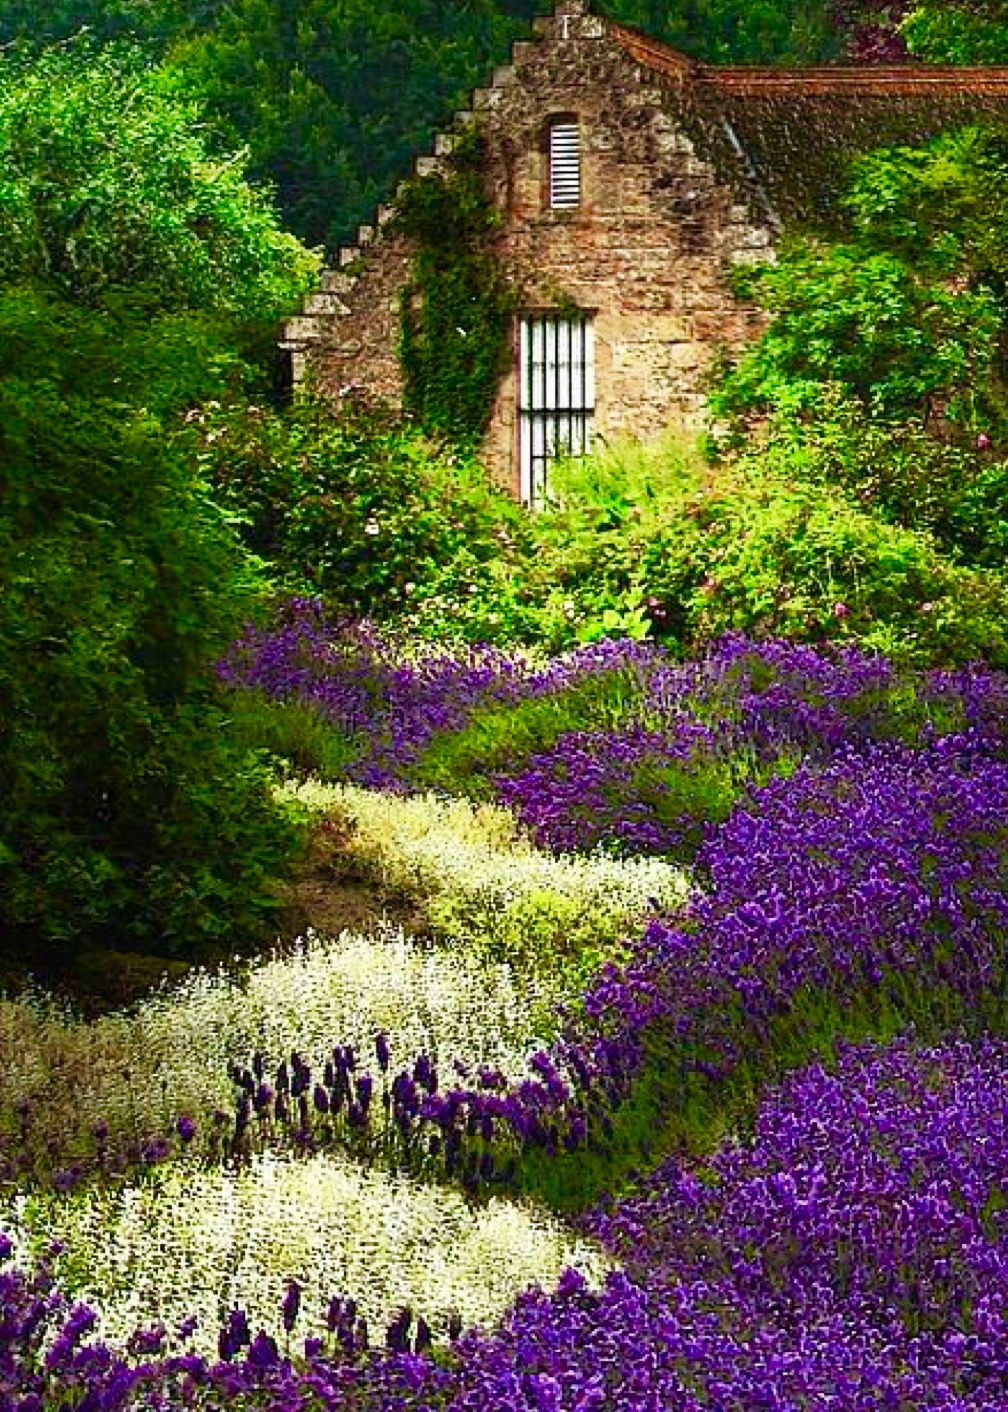 The House Cottage Garden